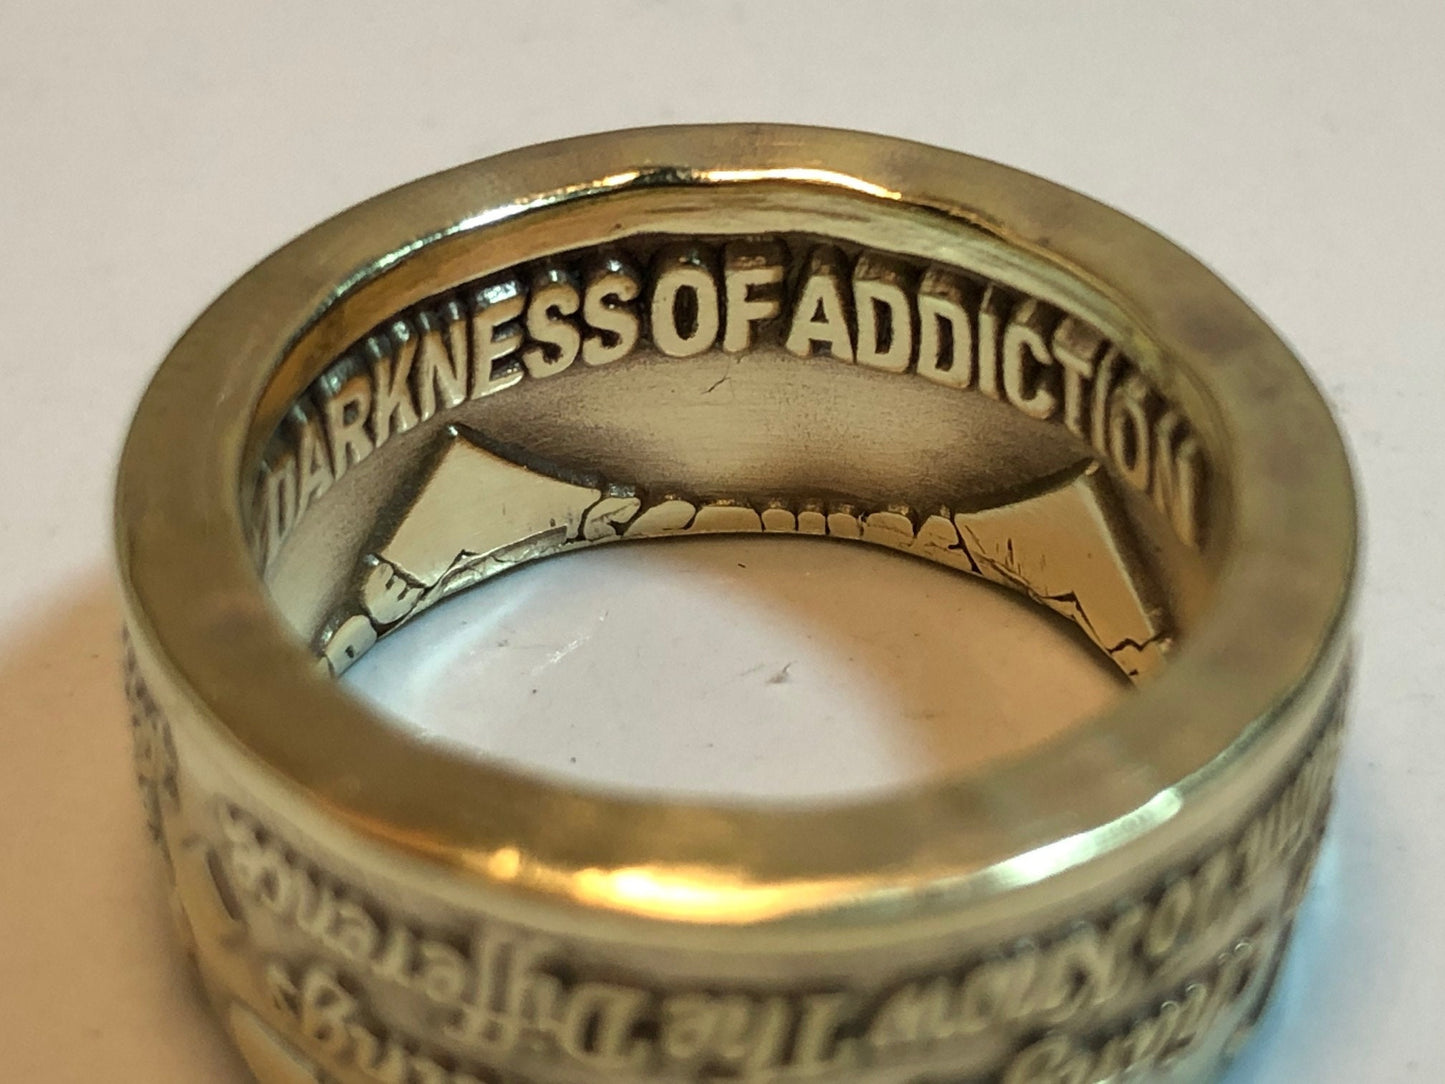 Addiction Coin Ring Ladies Serenity Prayer Drugs Alcohol Abuse Sober Recovery Ring Personal Jewelry Ring Gift Friend Ring Gift For Her Him